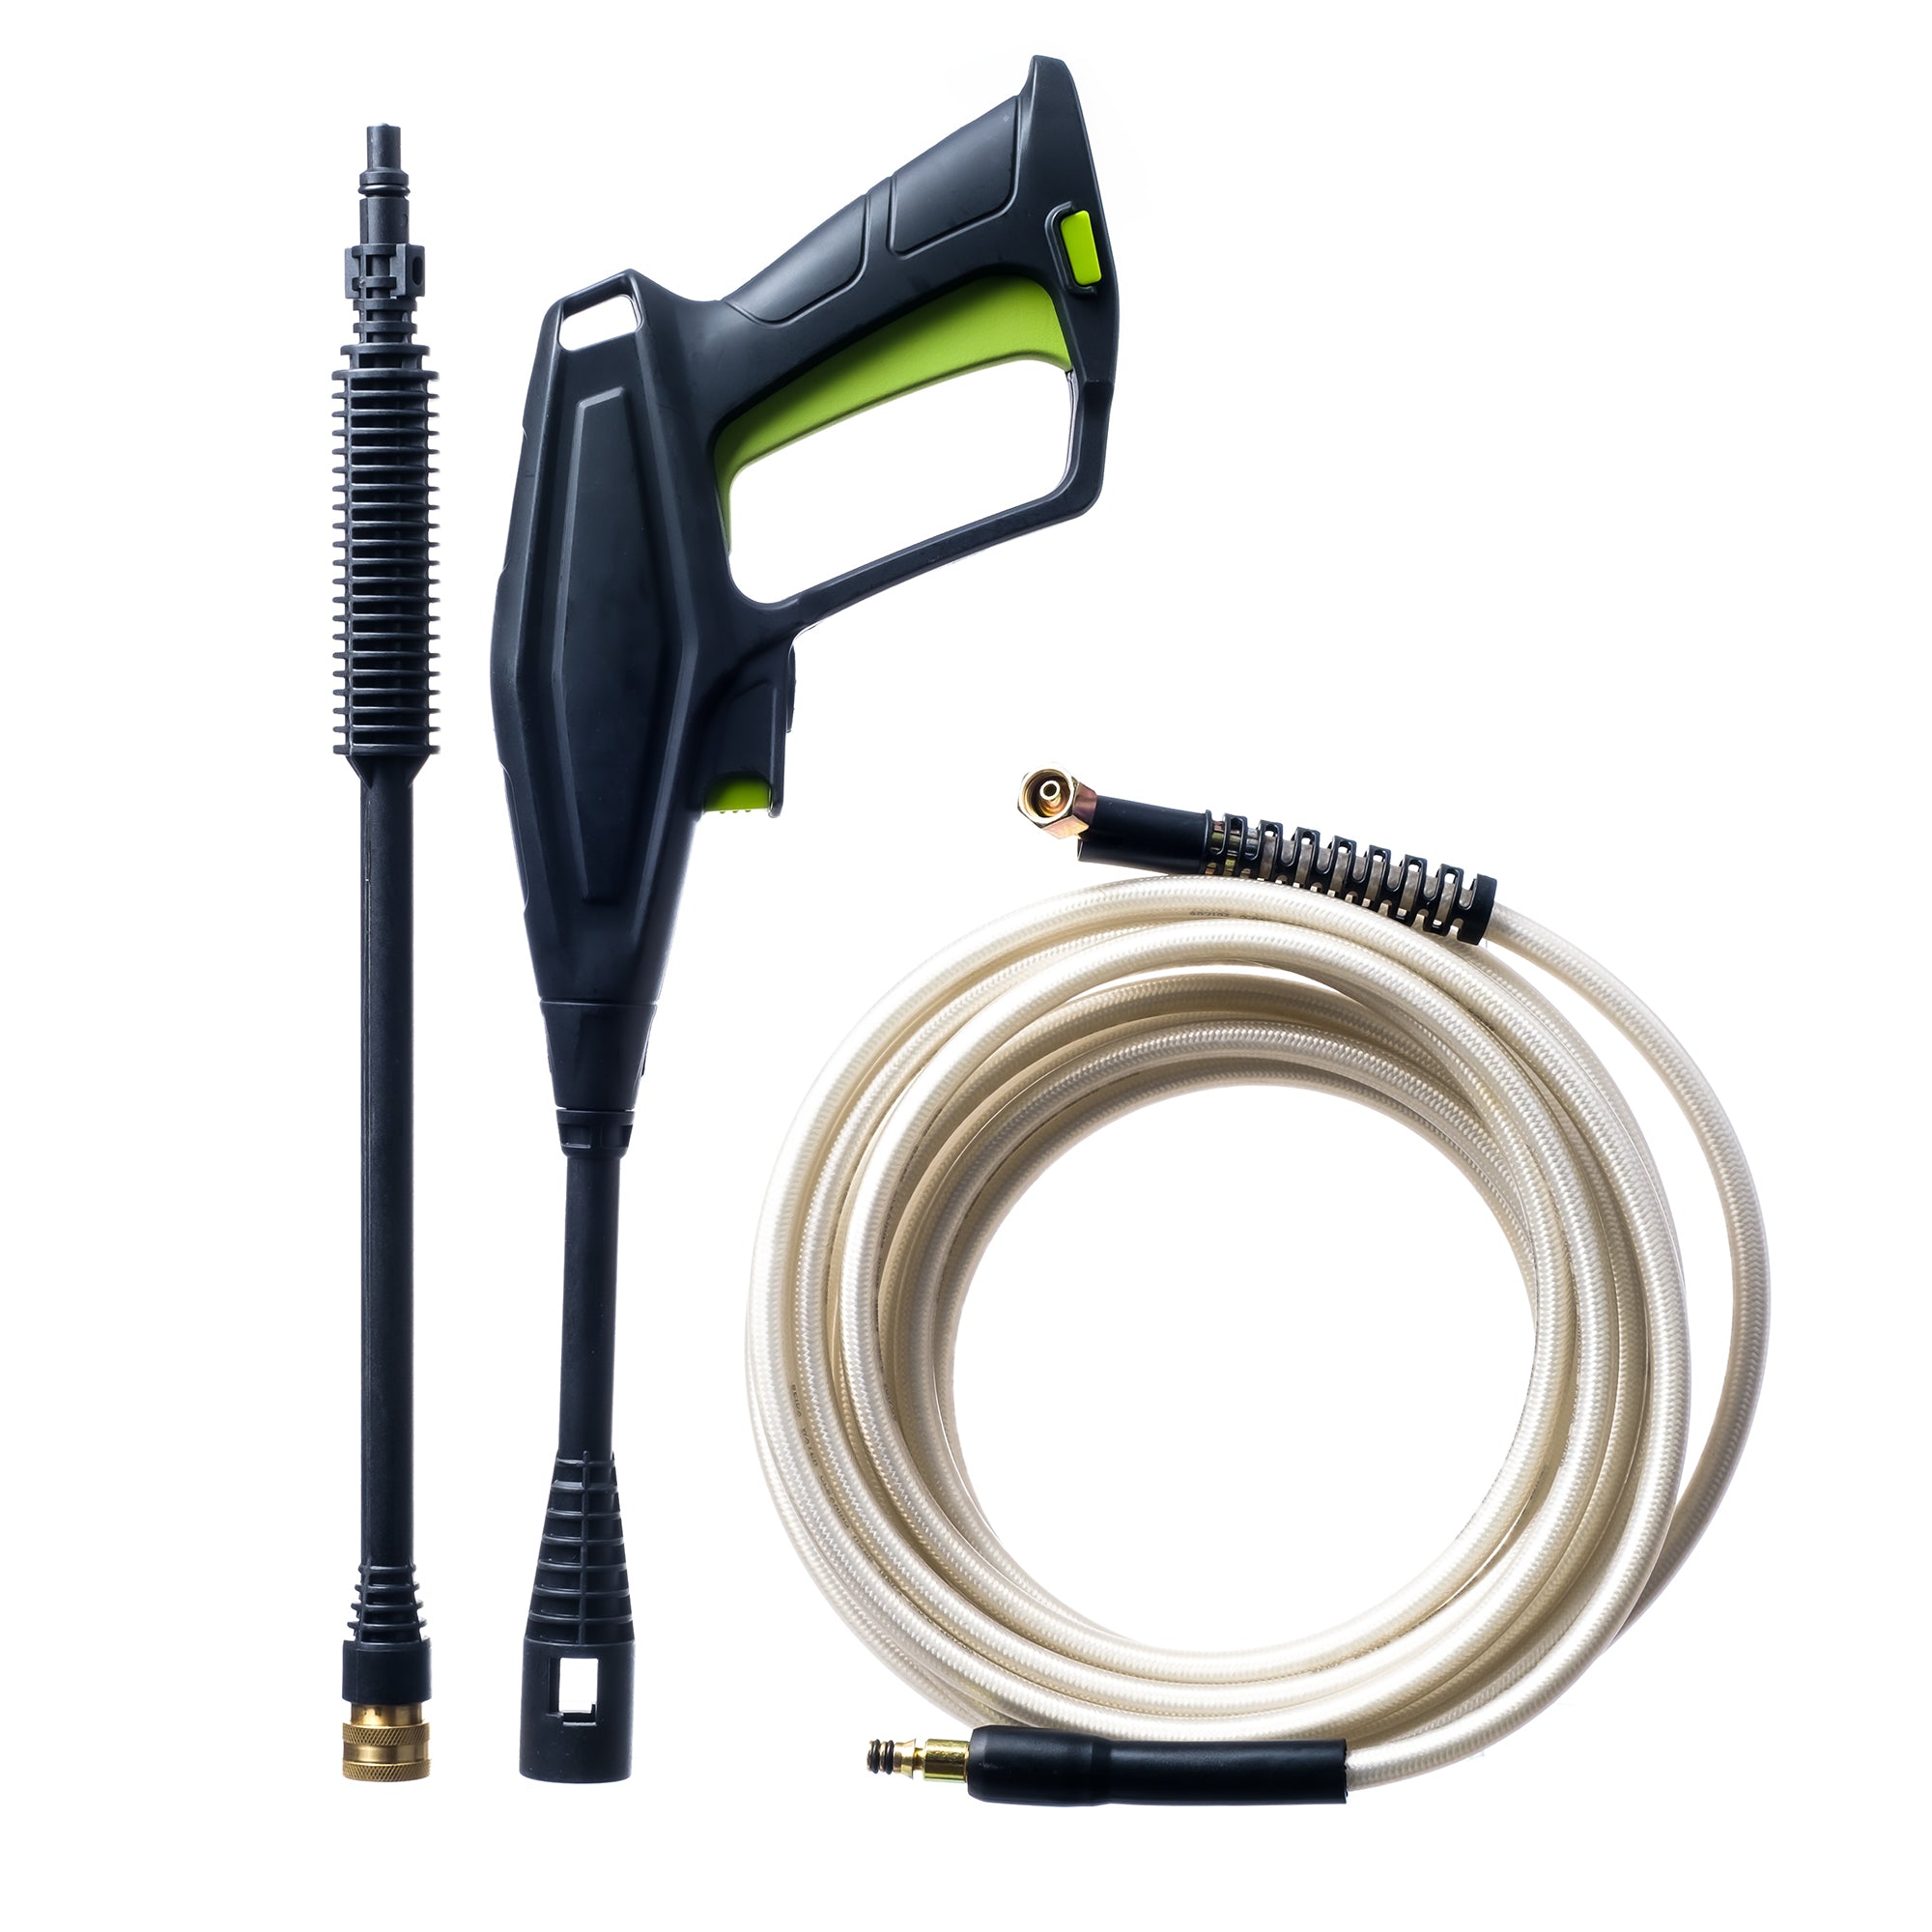 Pressure Hose, Gun, and Lance FOR MODELS PW18503 & PW20003FS CONSISTING OF FB619-02-27 HOSE, FQ-7 GUN HANDLE, AND FQ-7B SPRAY LANCE.
H.T.S. 8424.90.9080